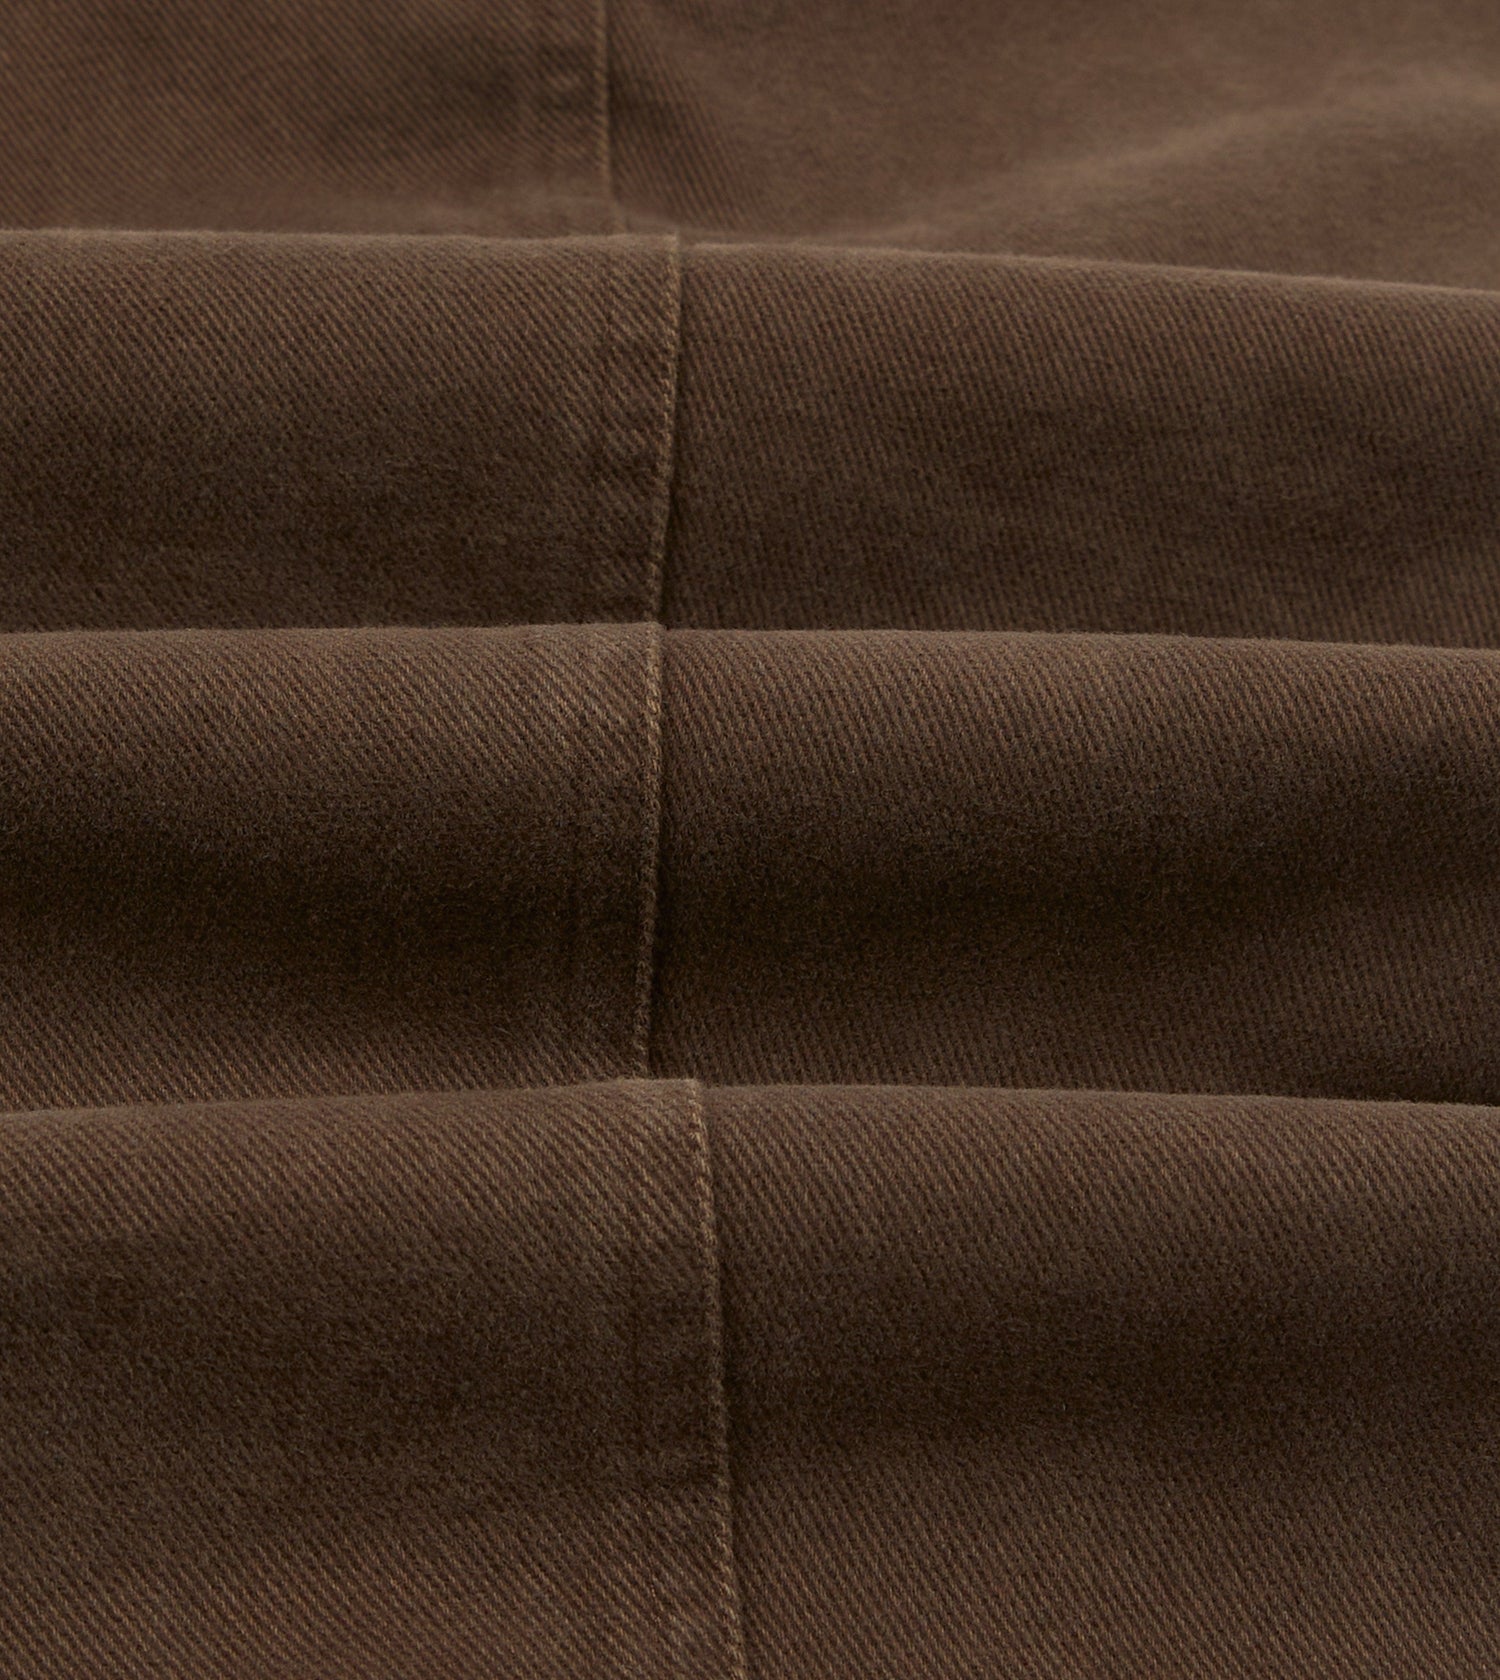 Brown Heavy Cotton Twill Games Trousers